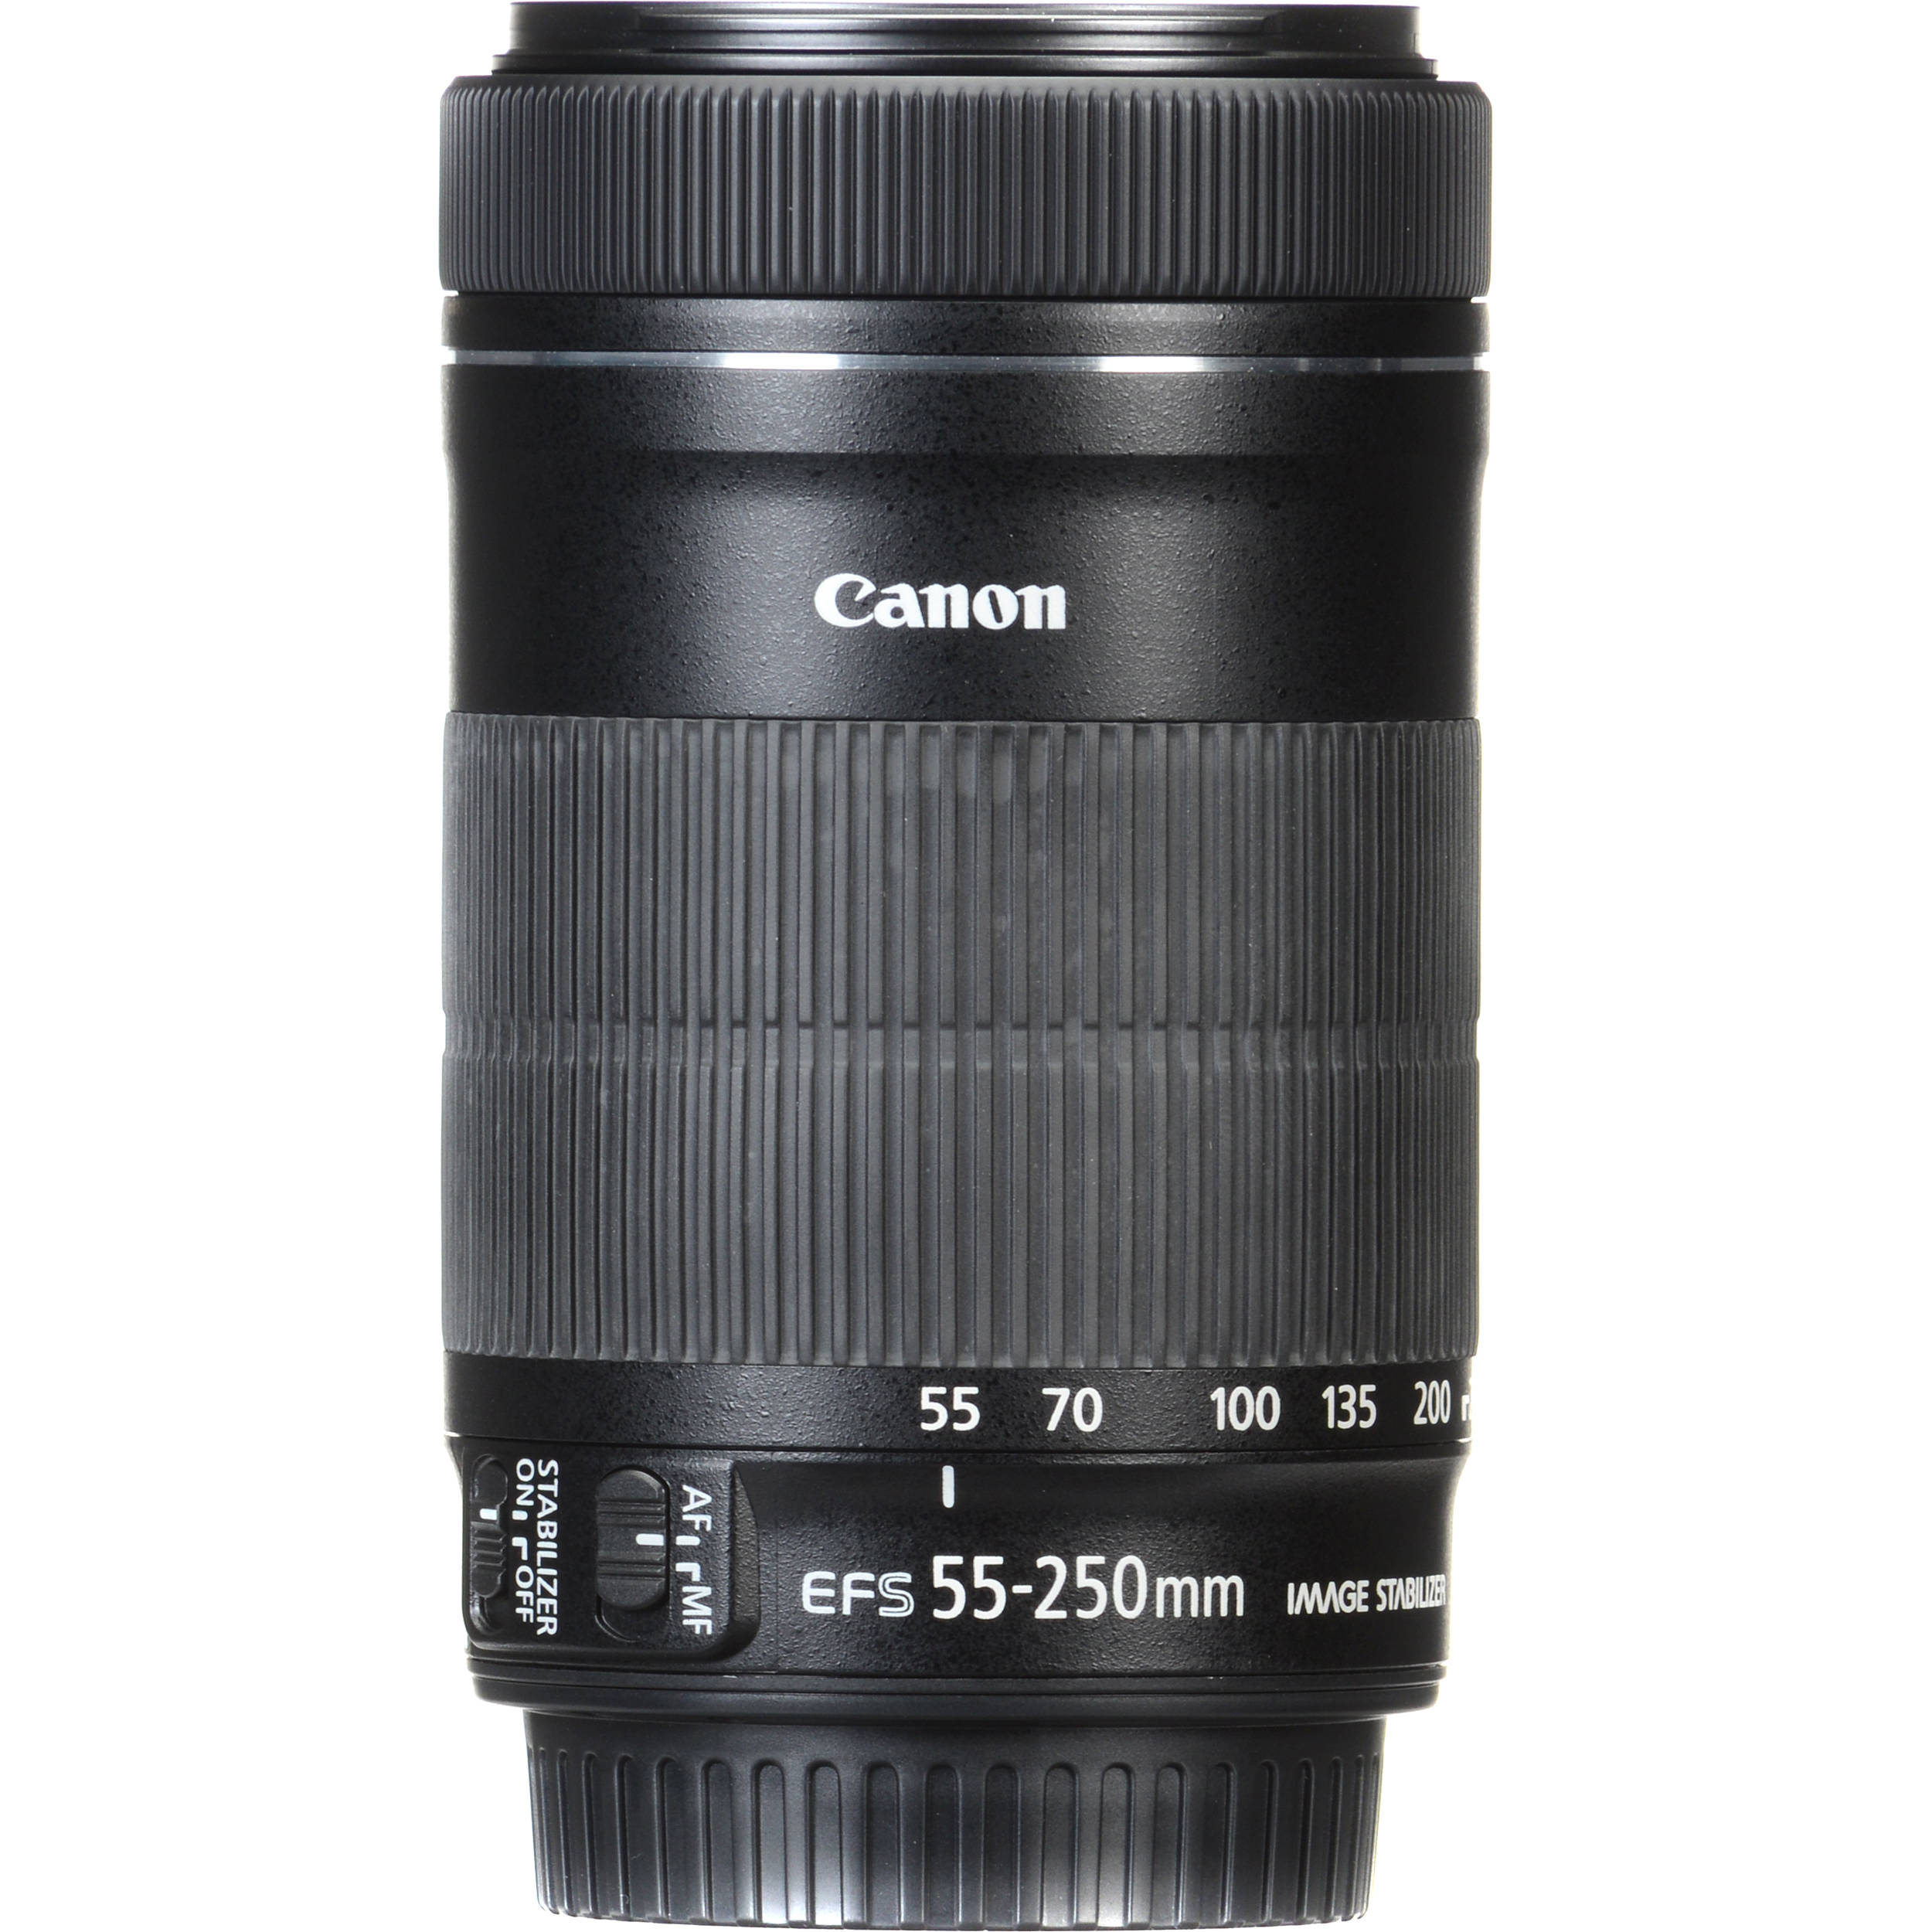 Canon Ef S 55 250mm F 4 5 6 Is Stm Lens 8546b002 B H Photo Video